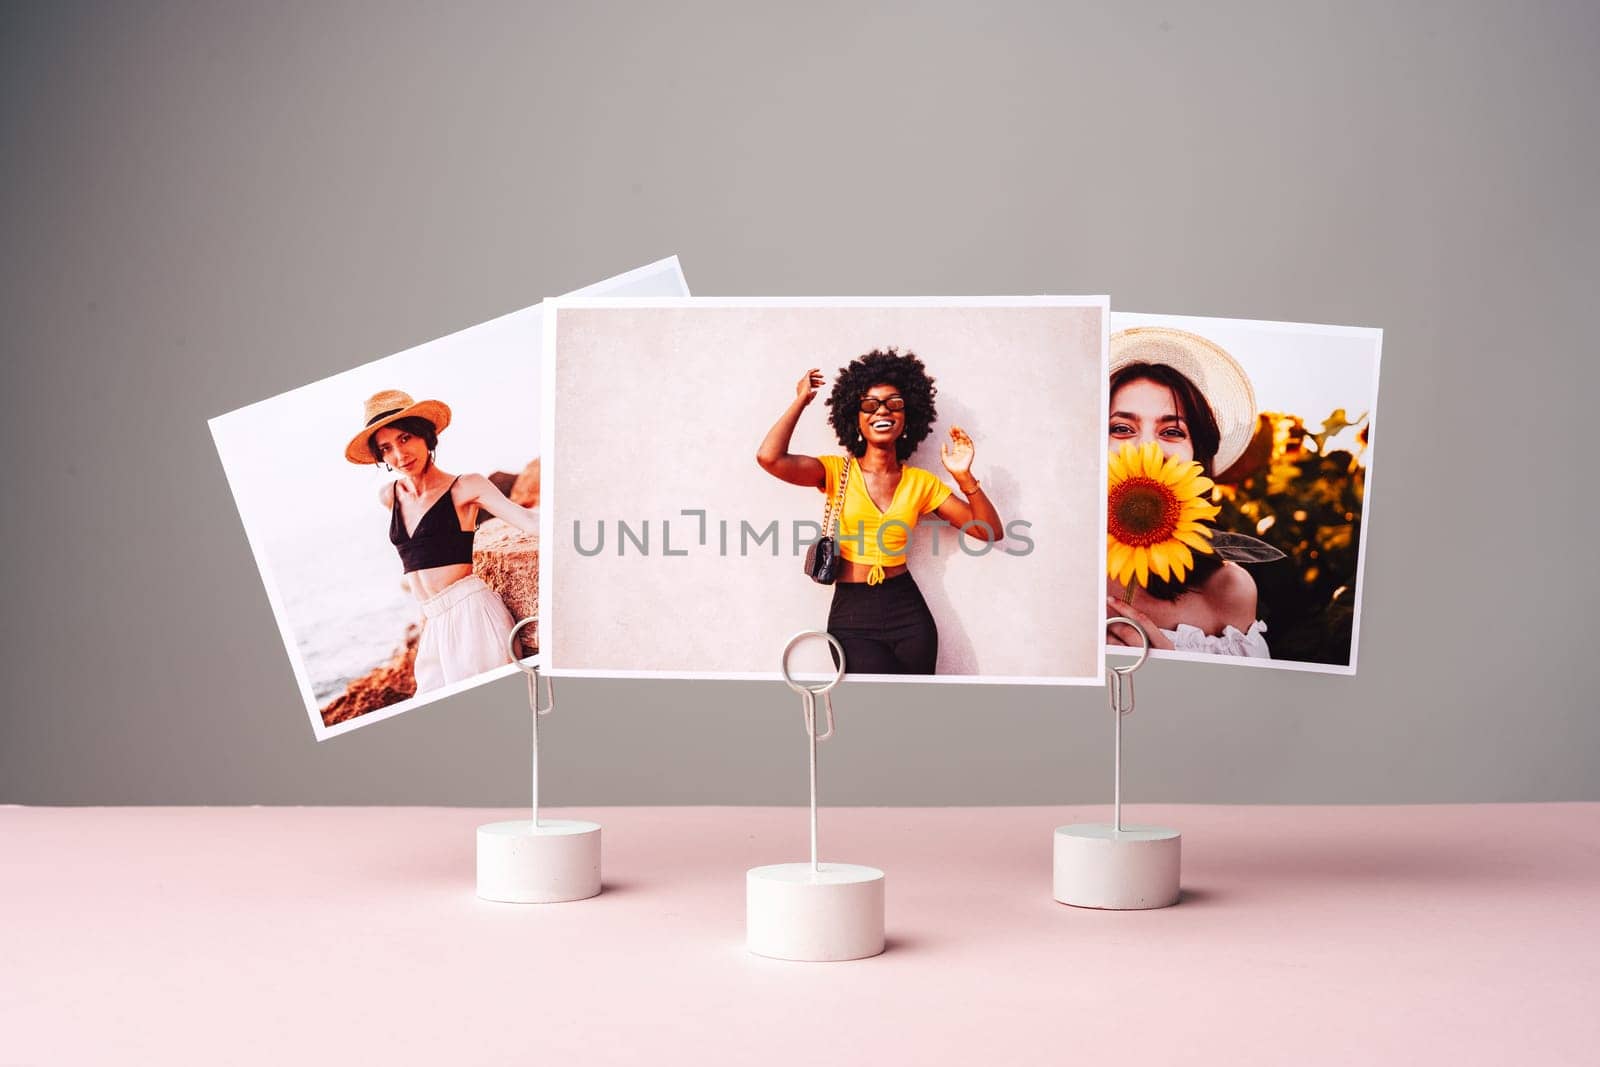 Printed colorful photos of women portraits against gray background by Fabrikasimf